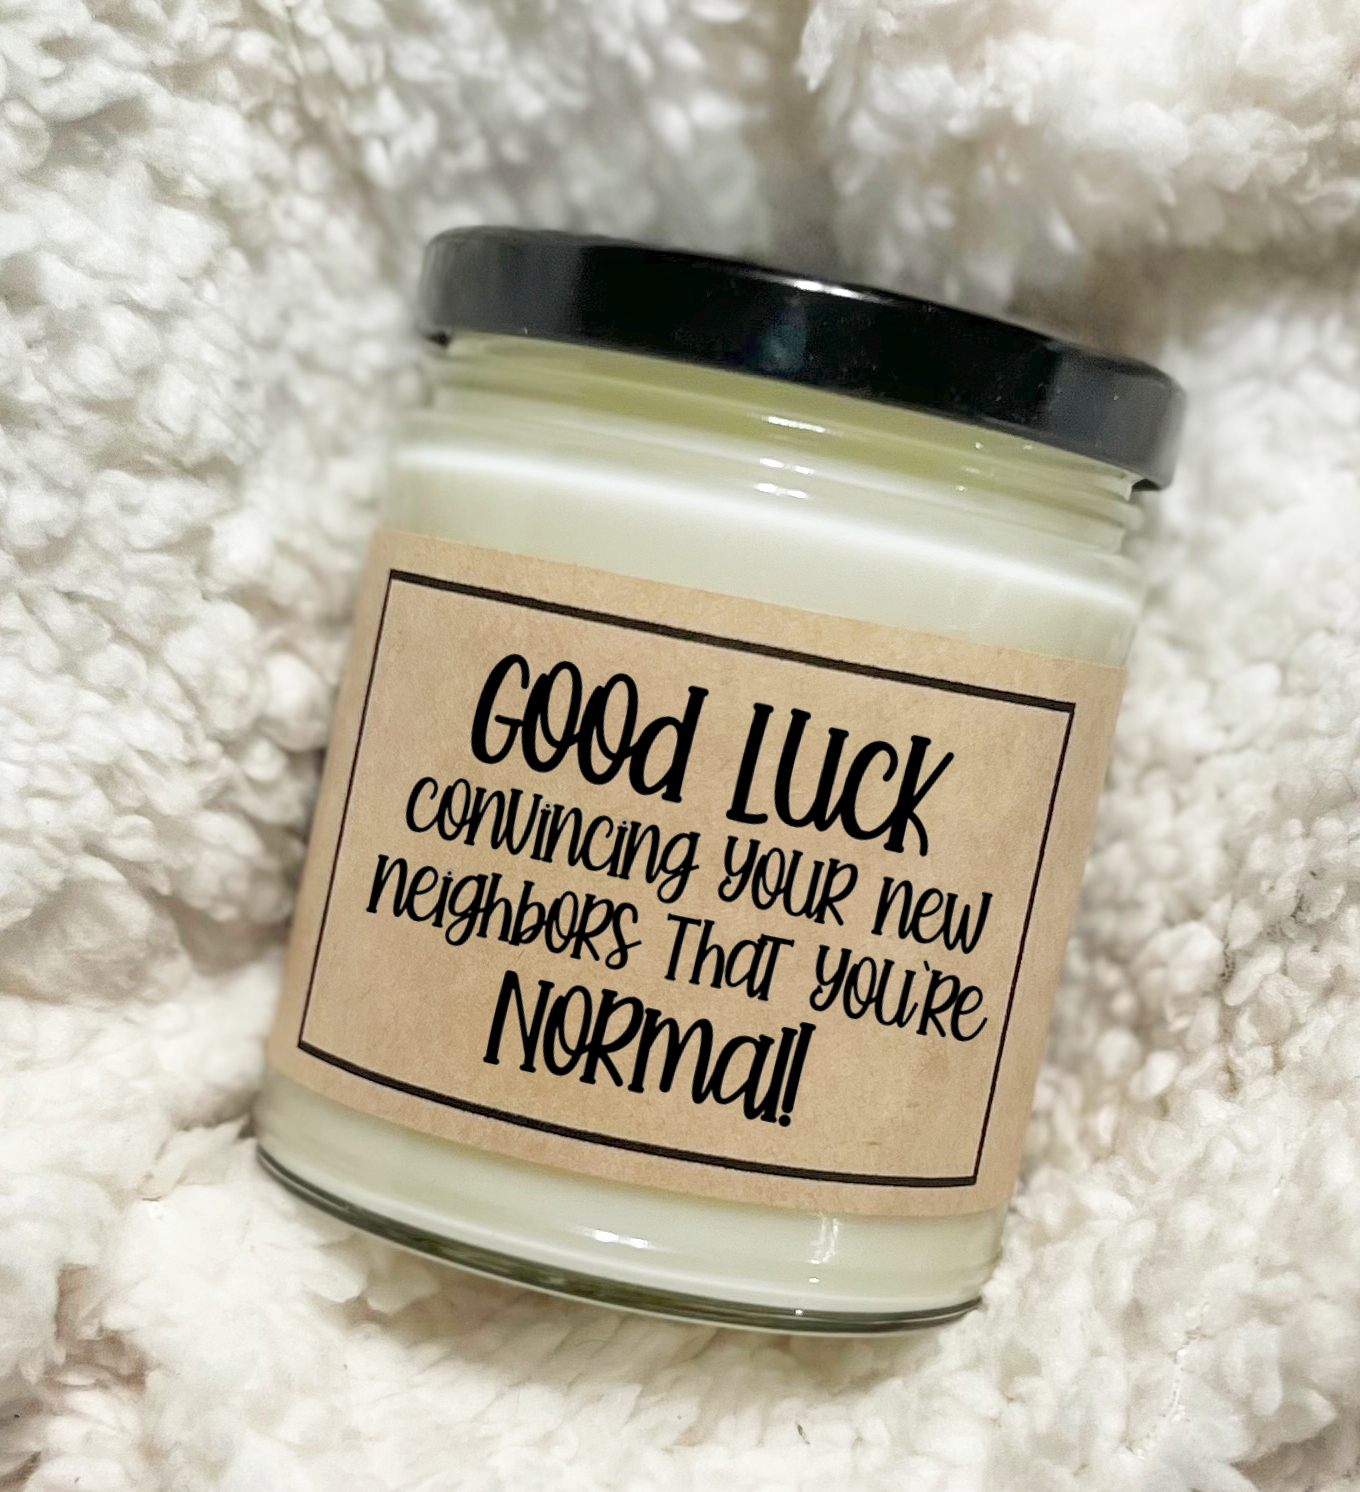 Good Luck Convincing Your New Neighbors That You're Normal - Custom Candle